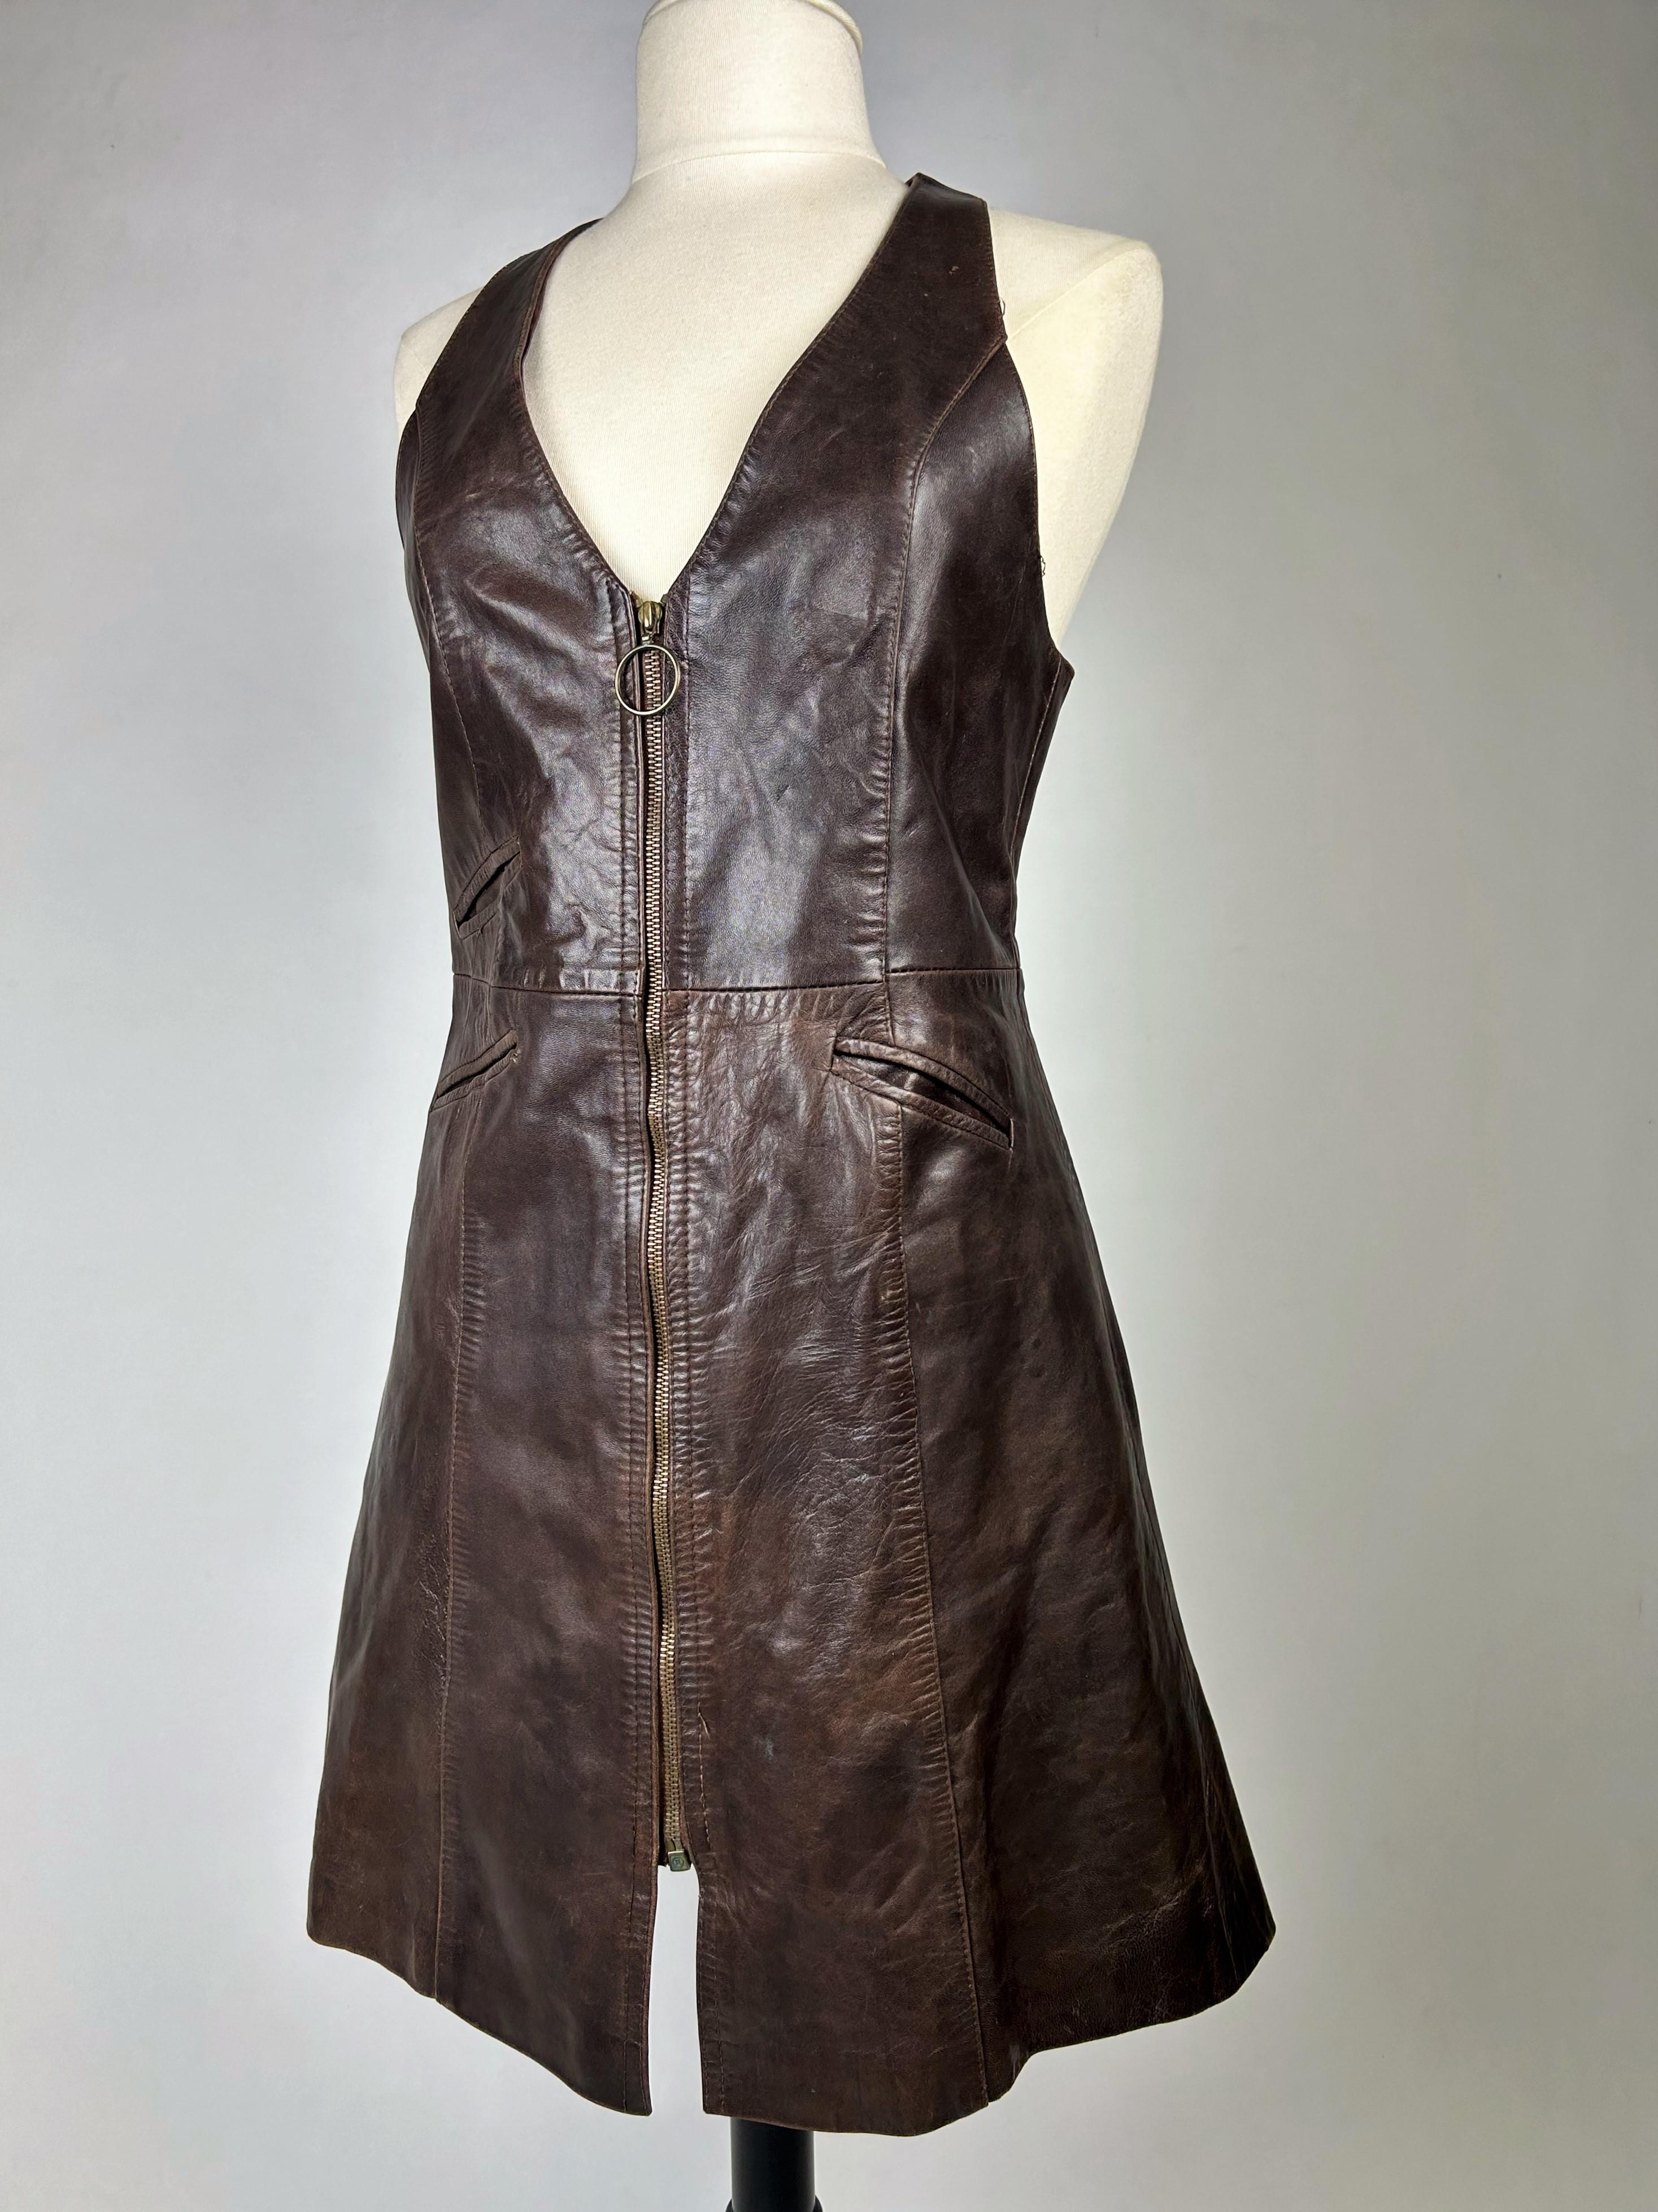 Circa 1975

Europe

Brown lamb leather tunic mini-dress by Rollanfer, dating from the 1970s. Fitted cut with a flared yoke at the bottom. Athletic 